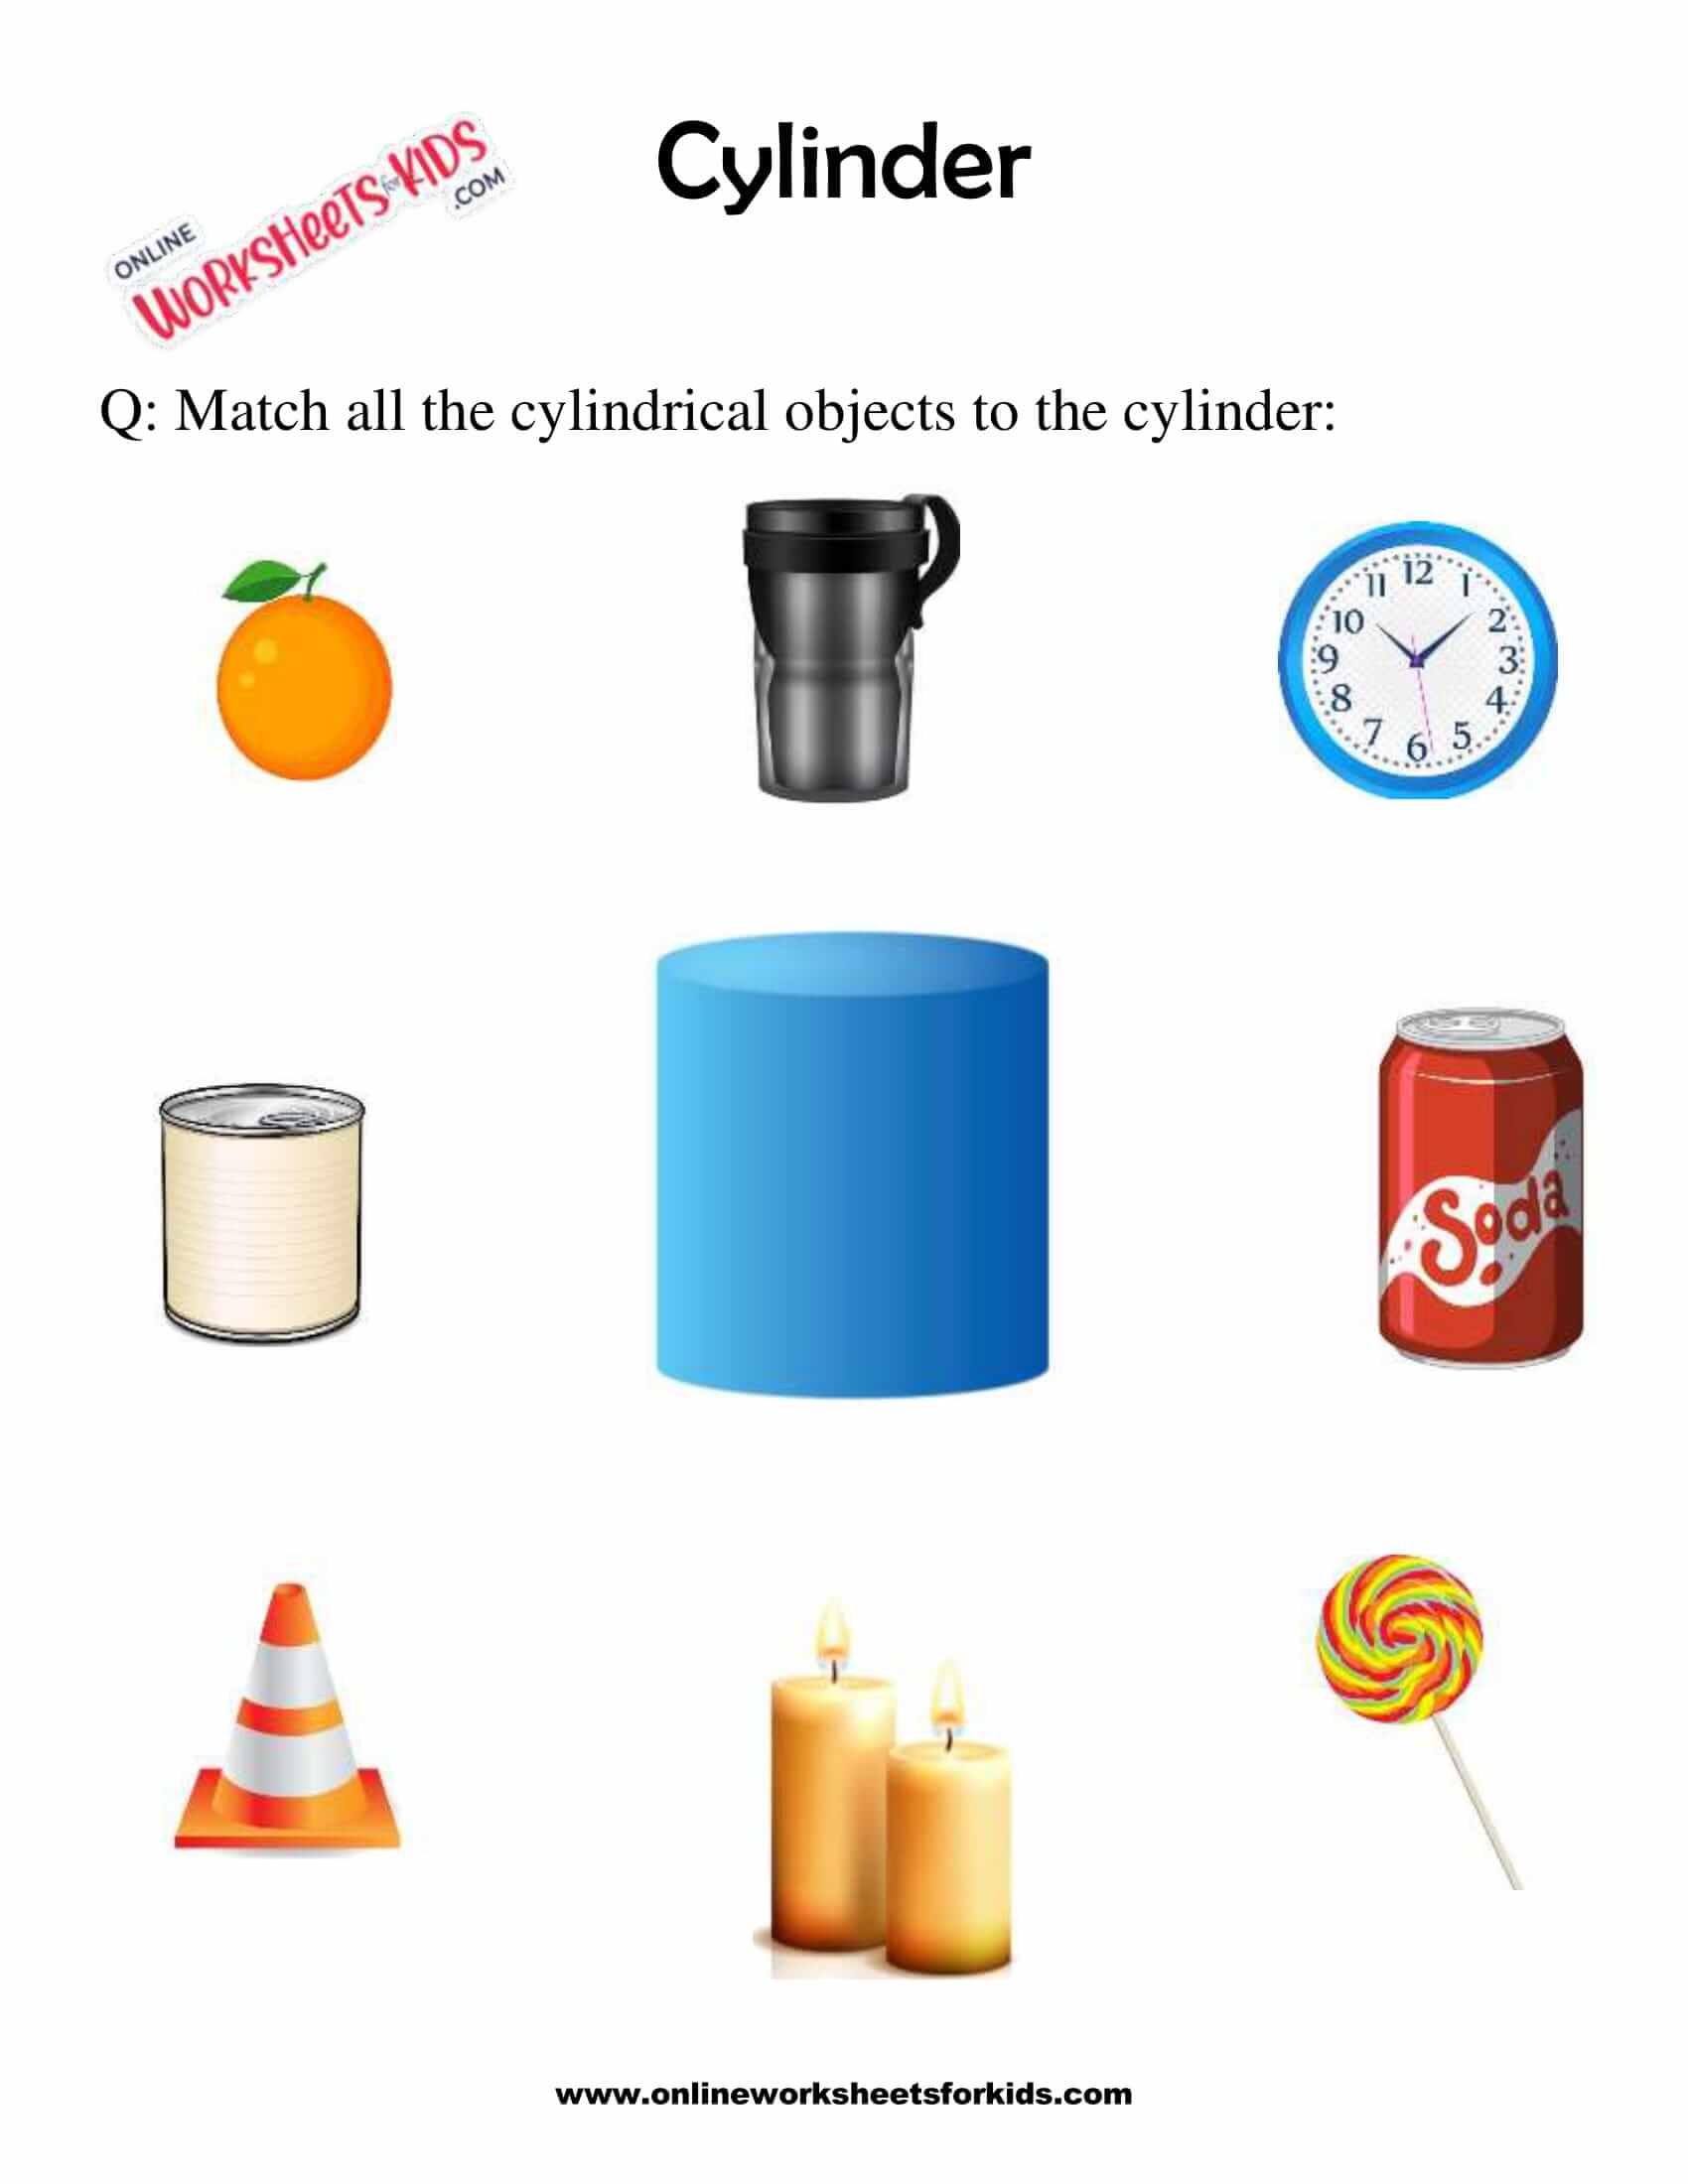 cylindrical shaped objects